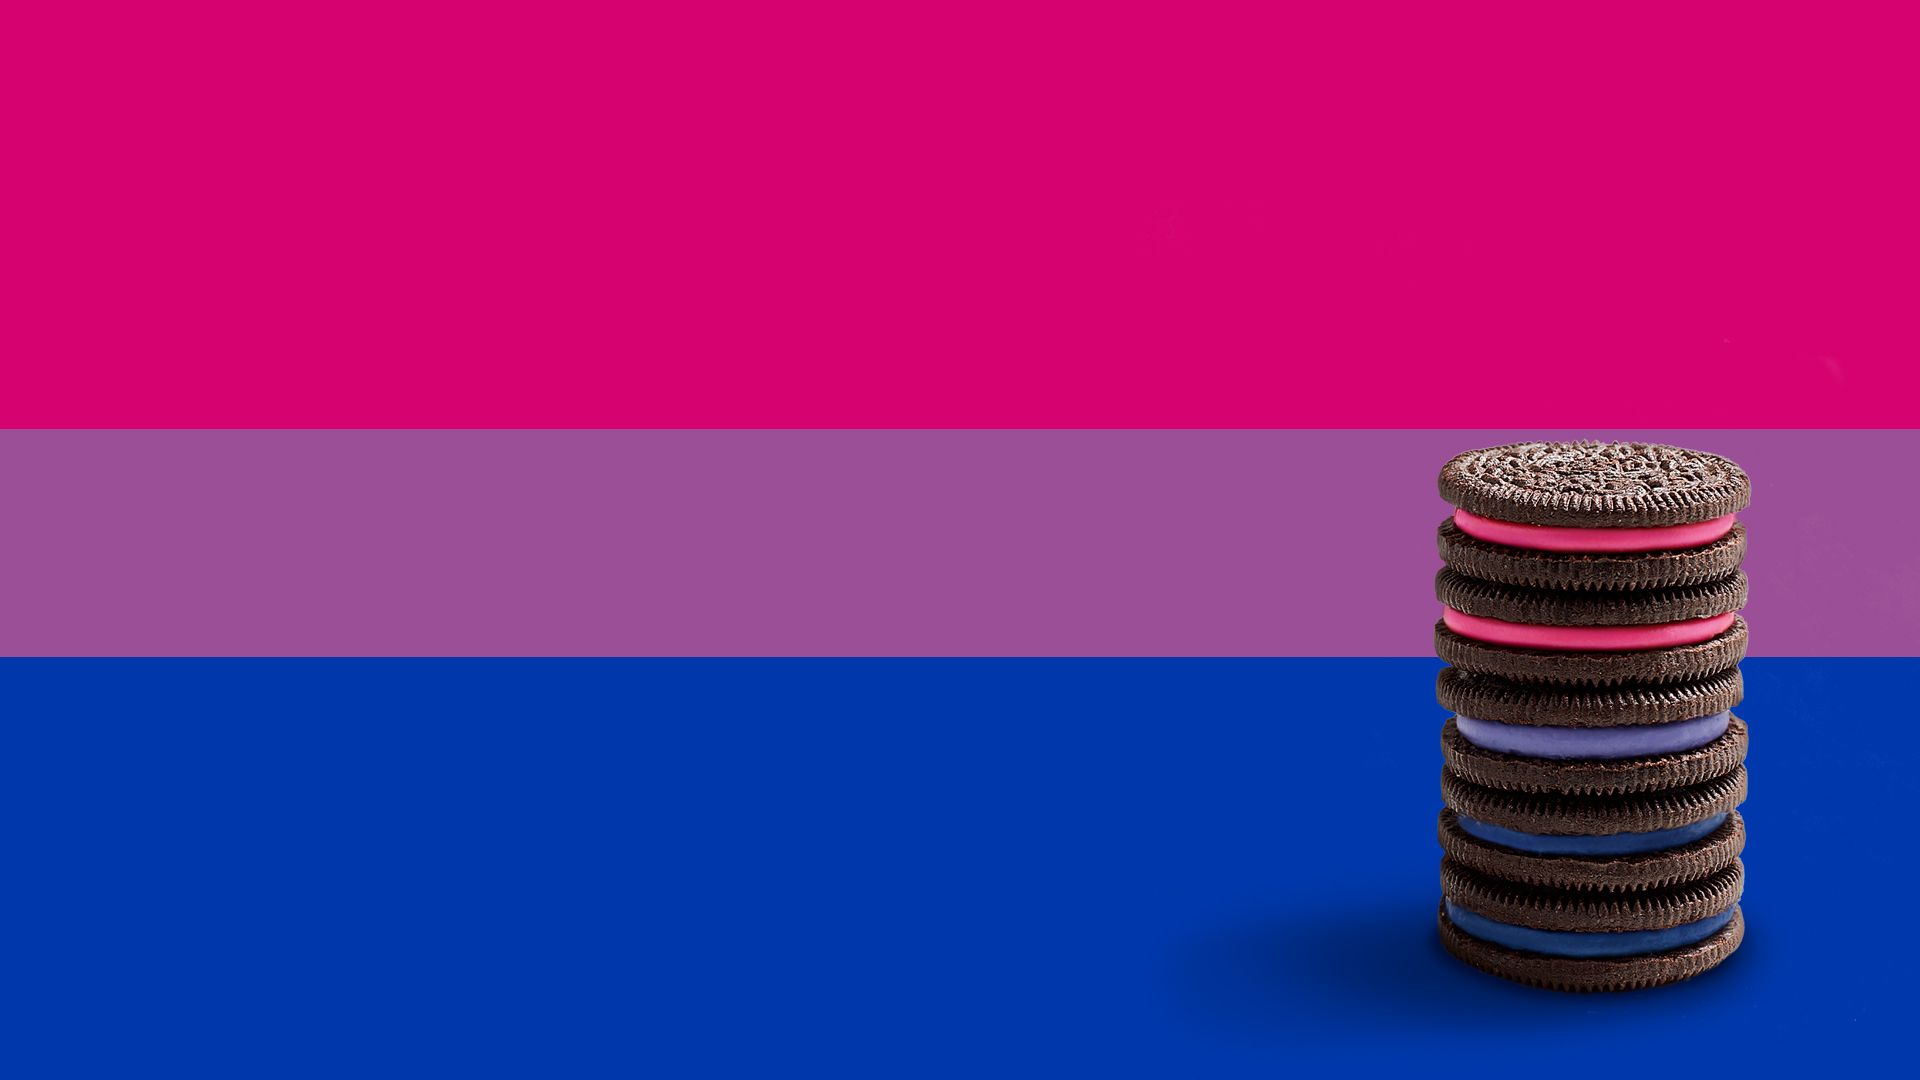 OREO Cookie on Twitter: The Bisexual pride flag consists of three horizonta...